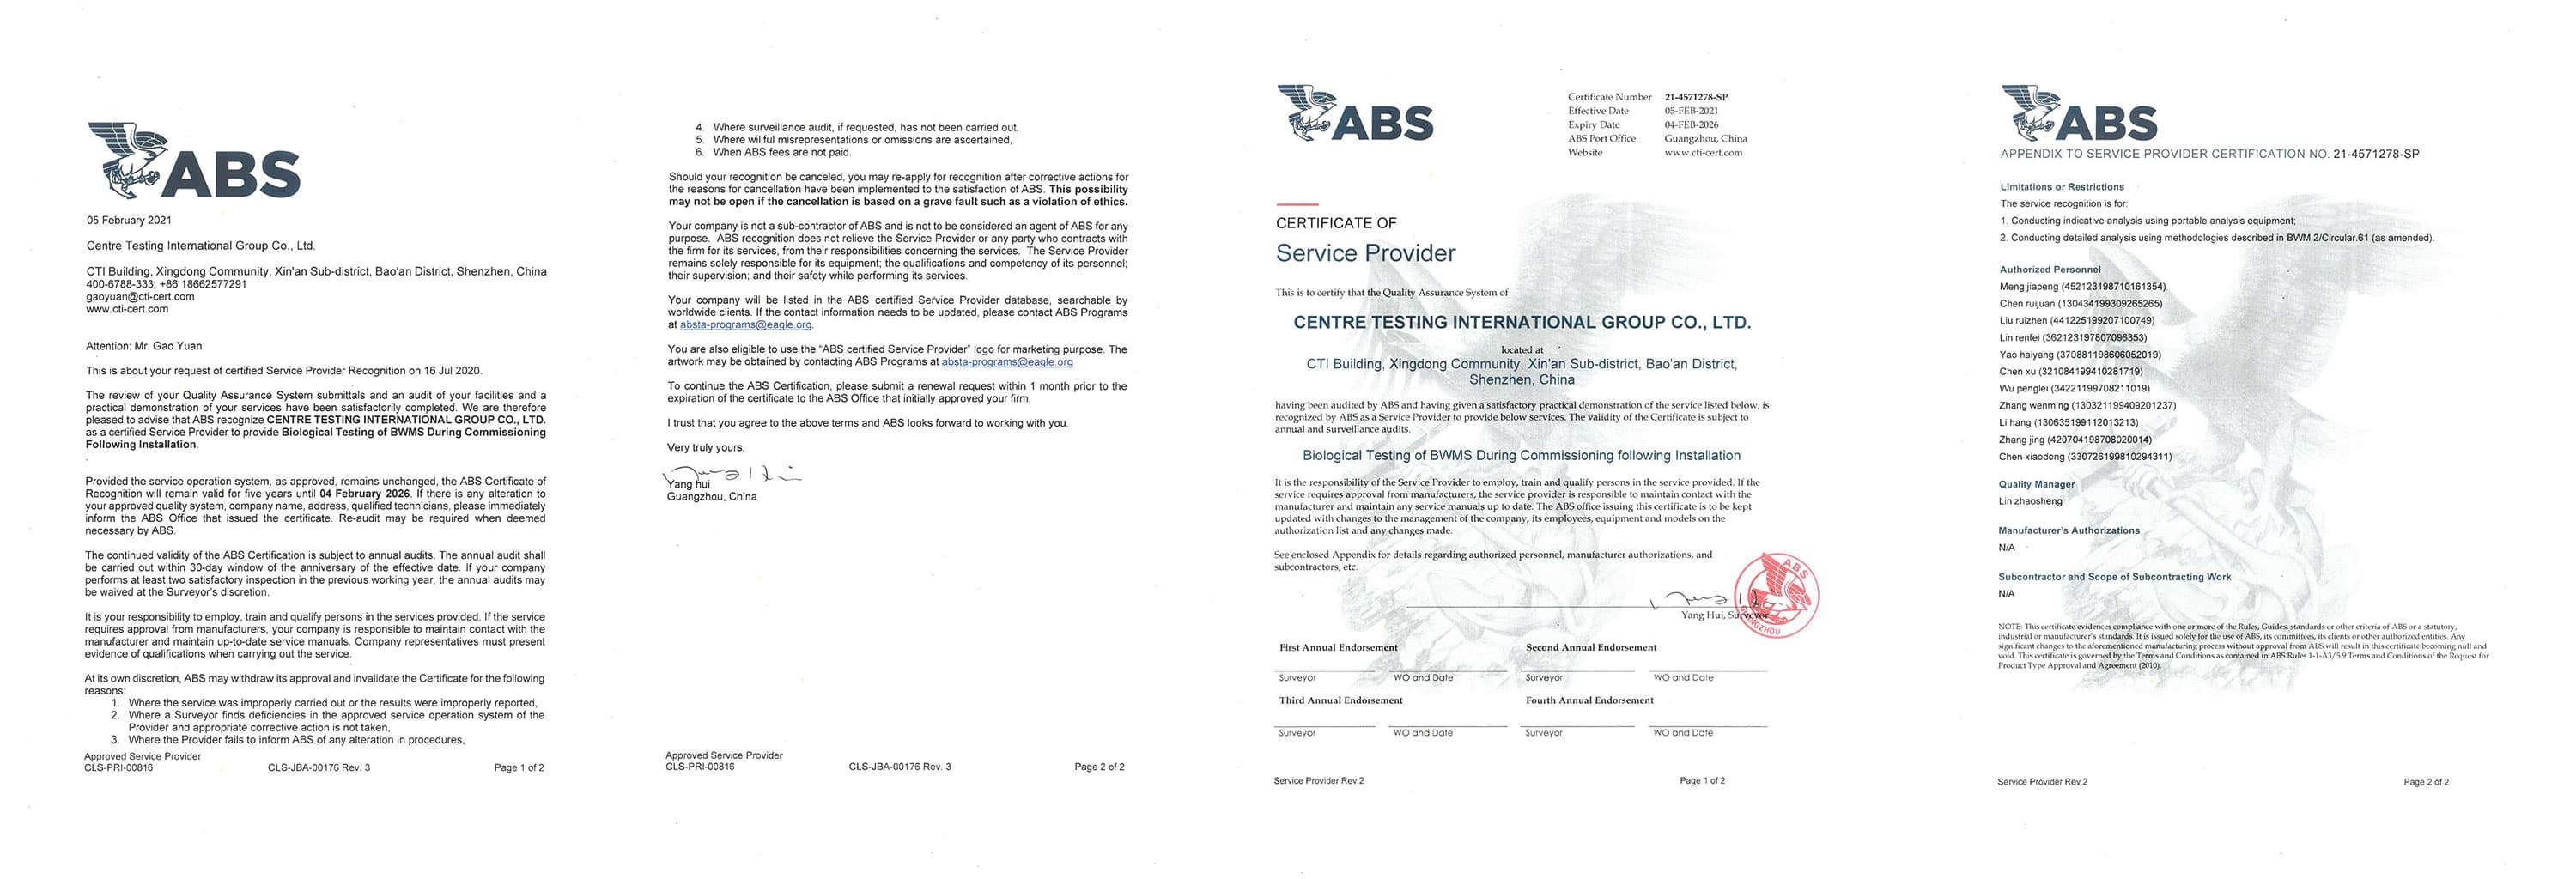 ABS approval certificate-BWMS commissioning testign